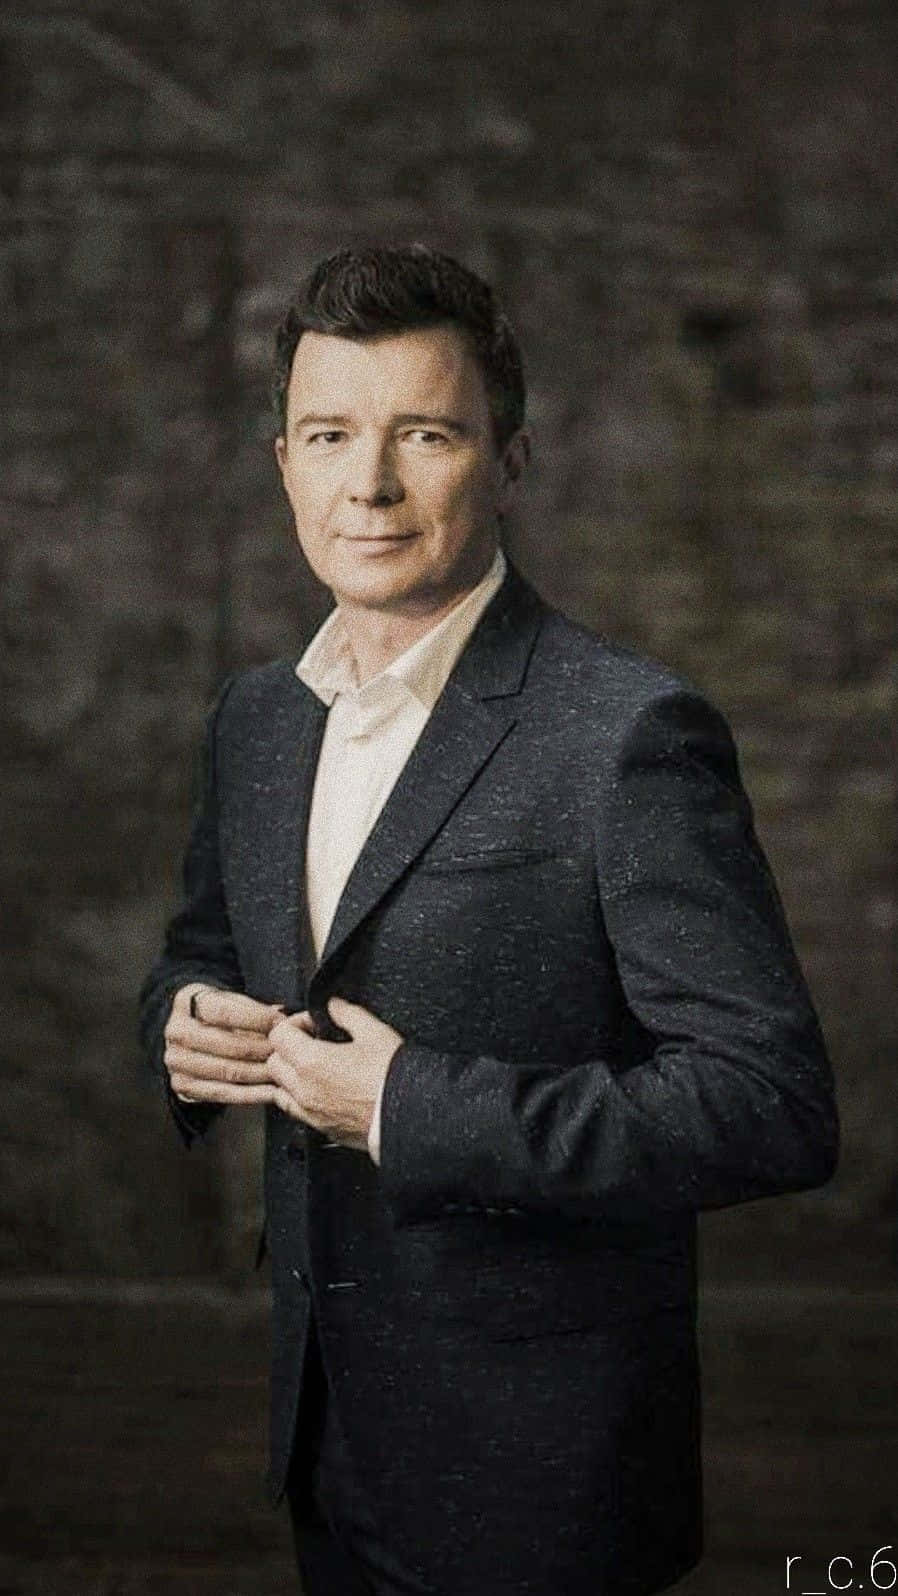 English Musician Rick Astley Performing On Stage Background